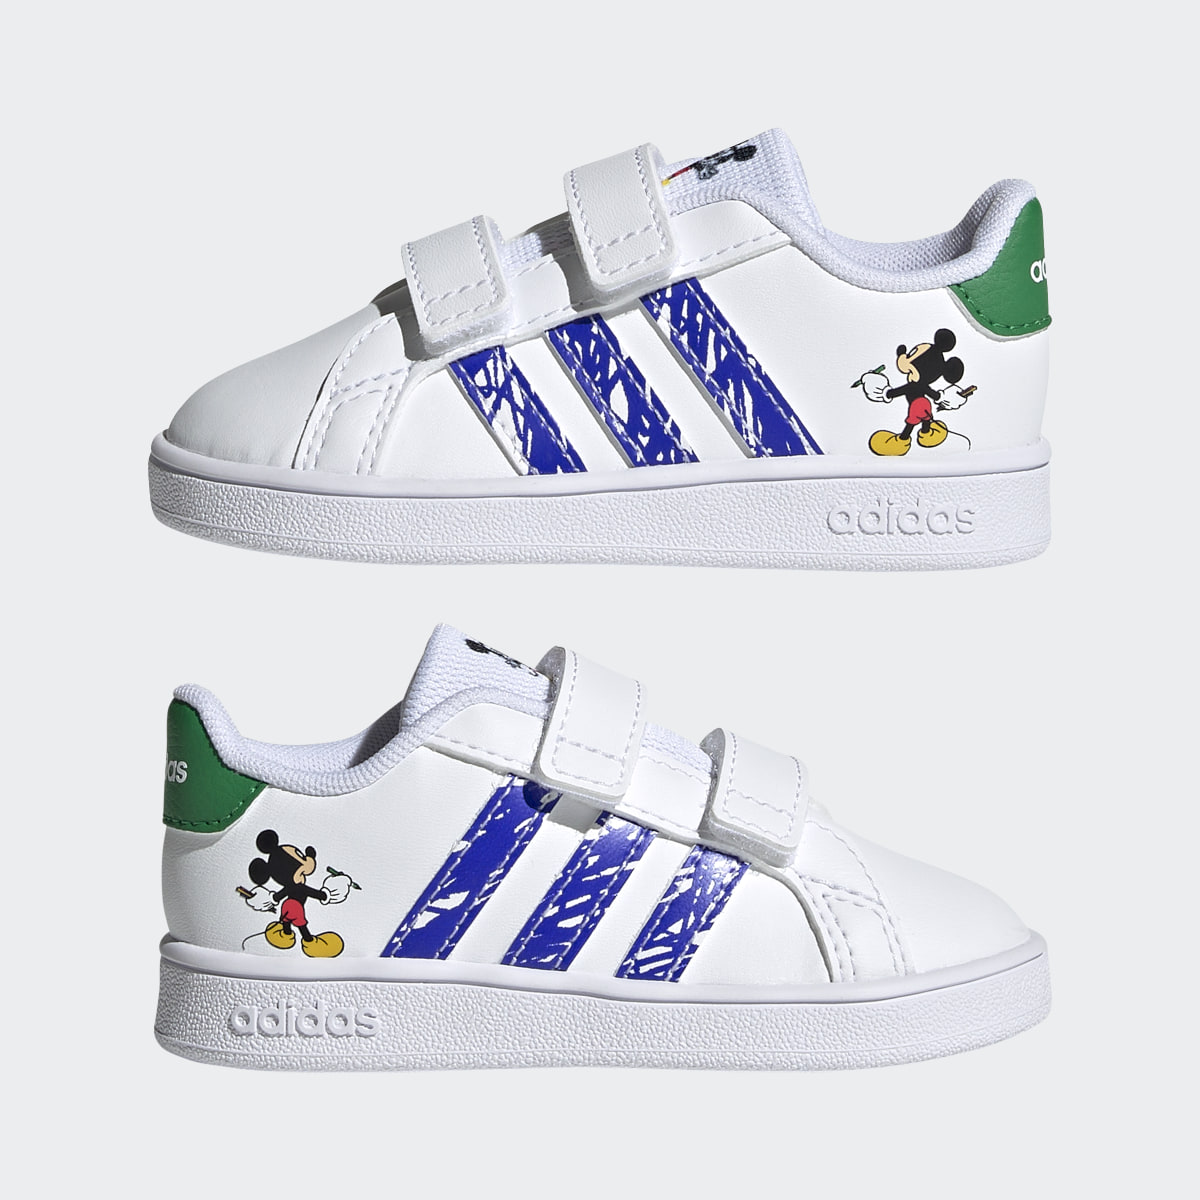 Adidas x Disney Minnie Mouse Grand Court Shoes. 8